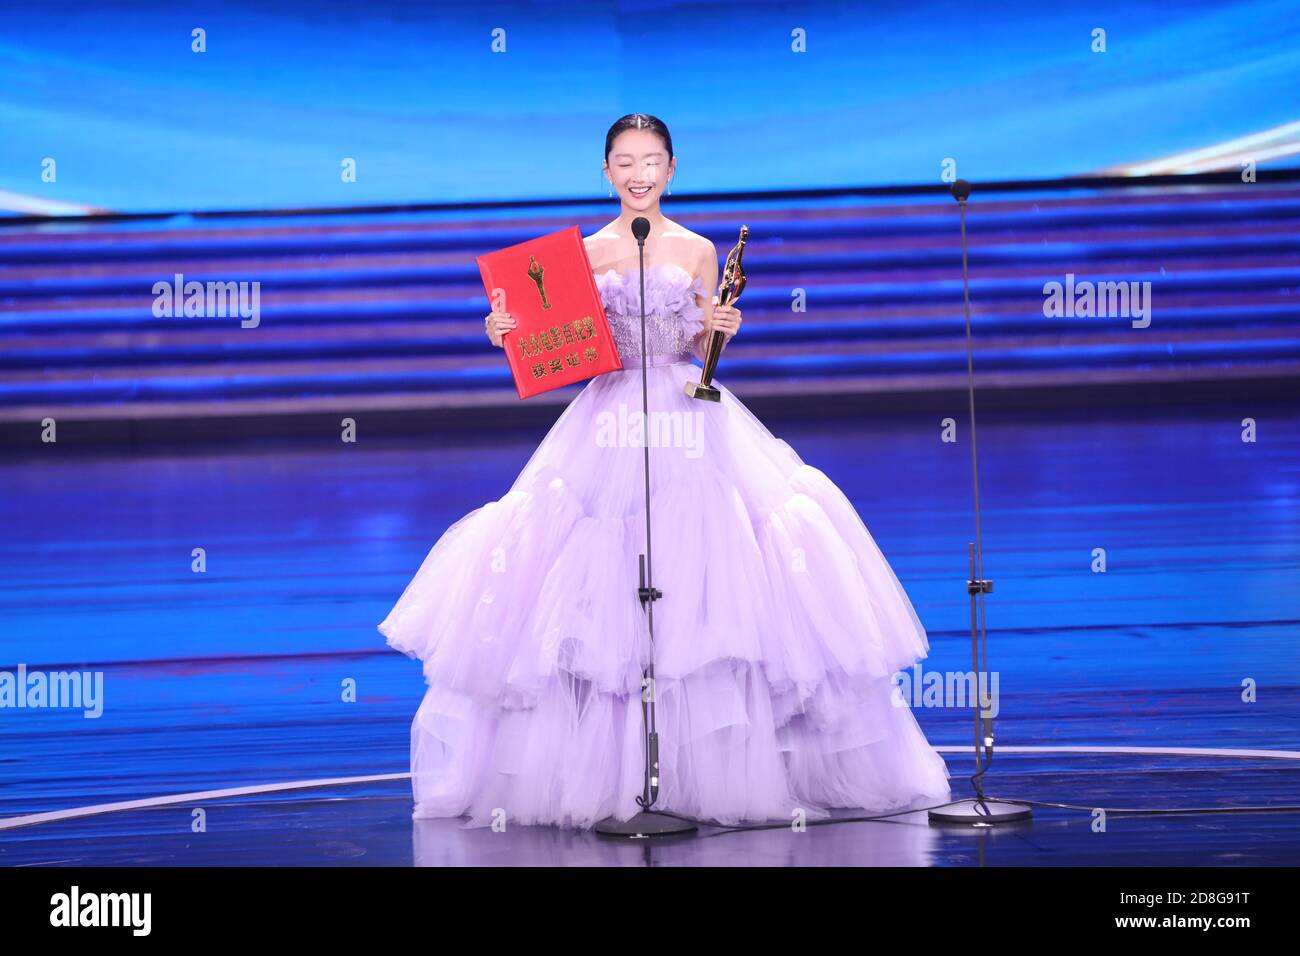 BeijingNews 新京报on X: Chinese actress Zhou Dongyu picked up Best Actress of  the 14th #AsianFilmAwards. Jackson Yee won the Best Newcomer. Both actors  were starring in the 2019 Chinese romantic